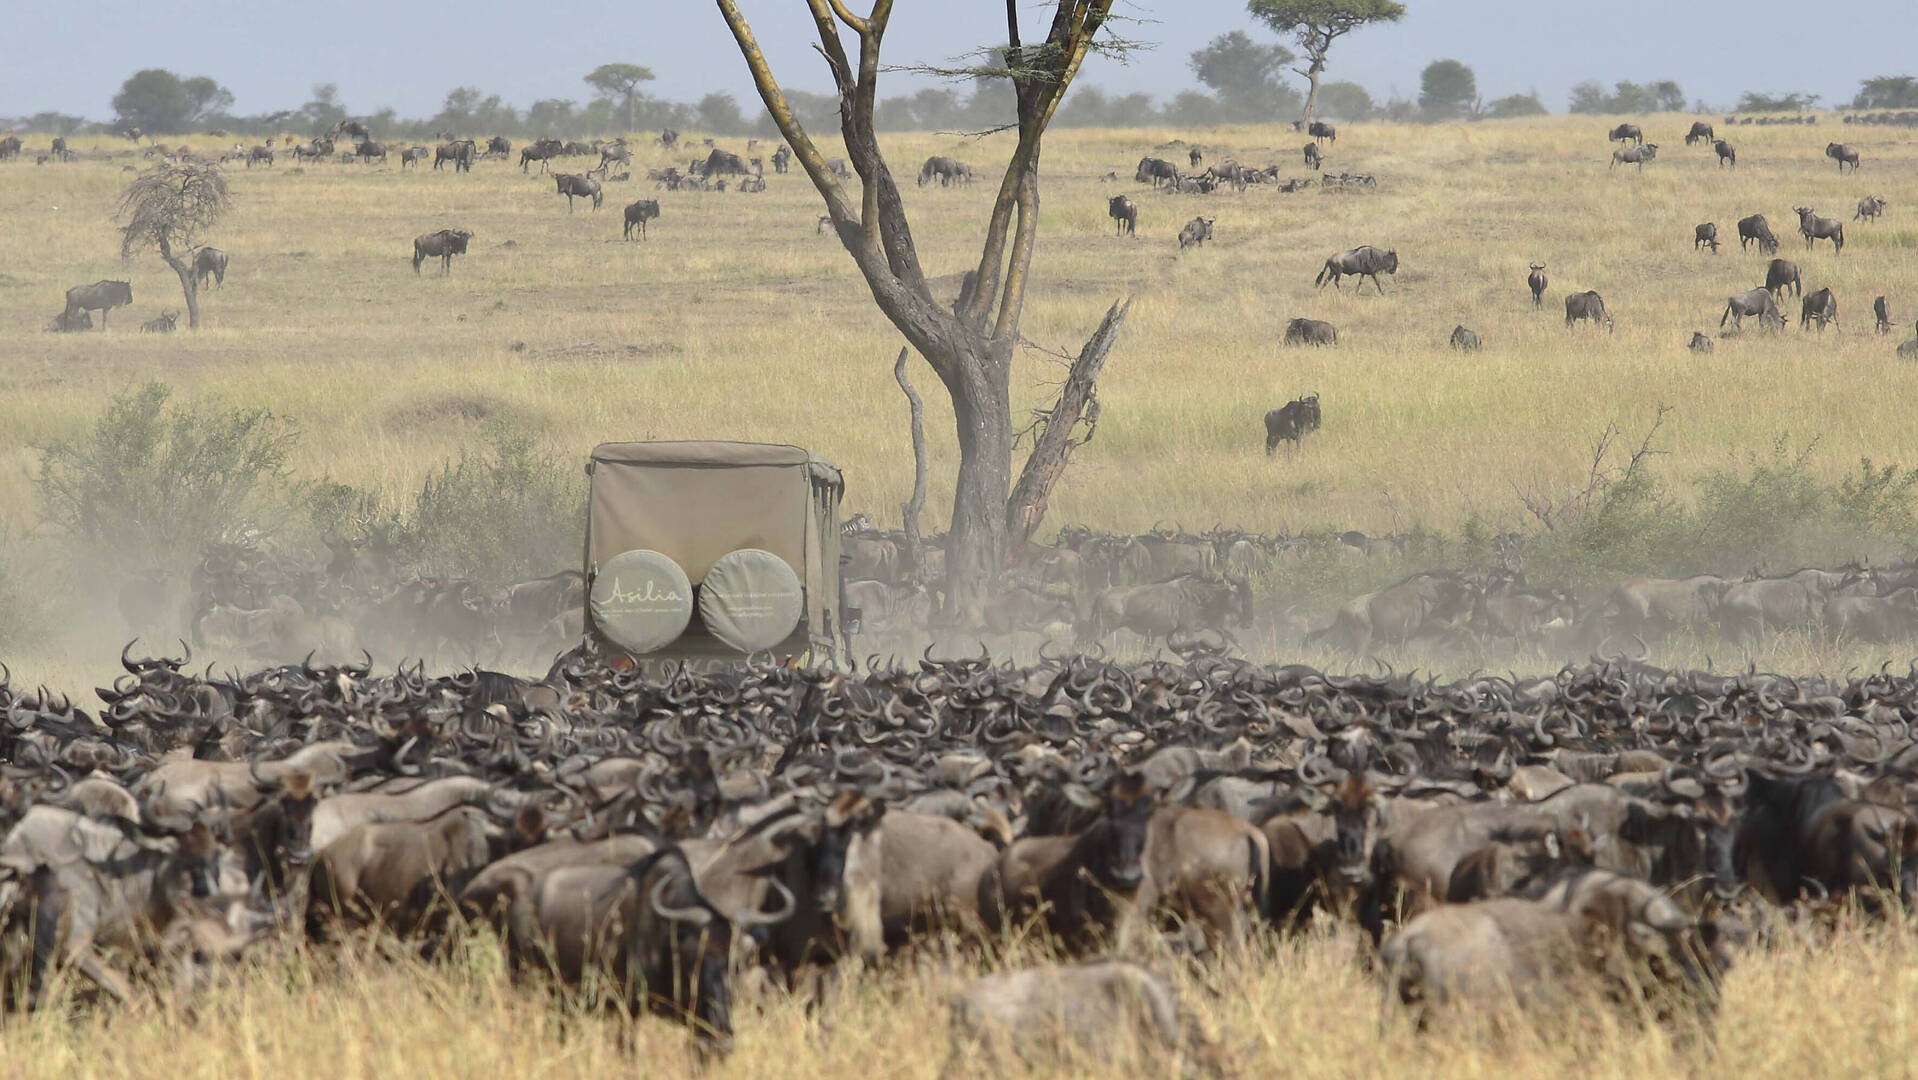 Serengeti wildebeest migration explained with moving map